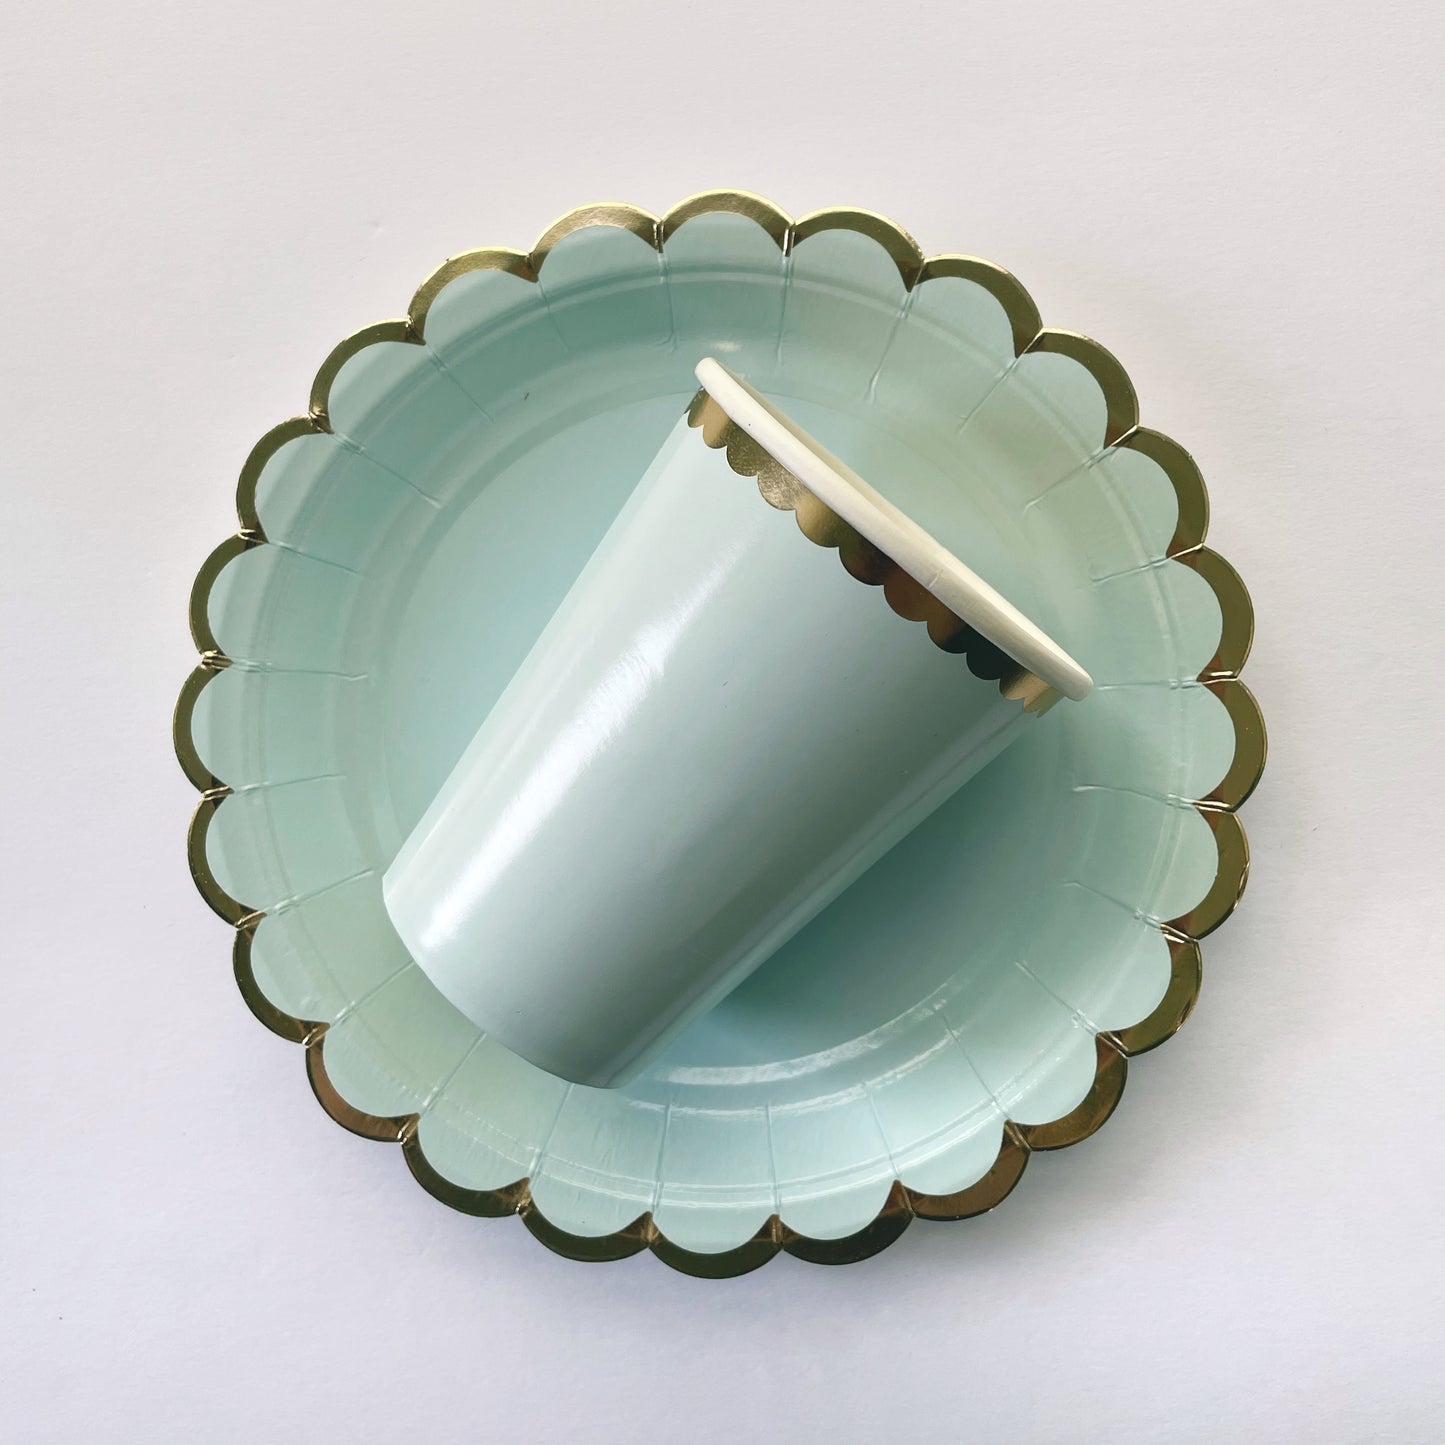 Small paper party plates and party cups. They are a pale pastel blue colour with gold foil scalloped trim.